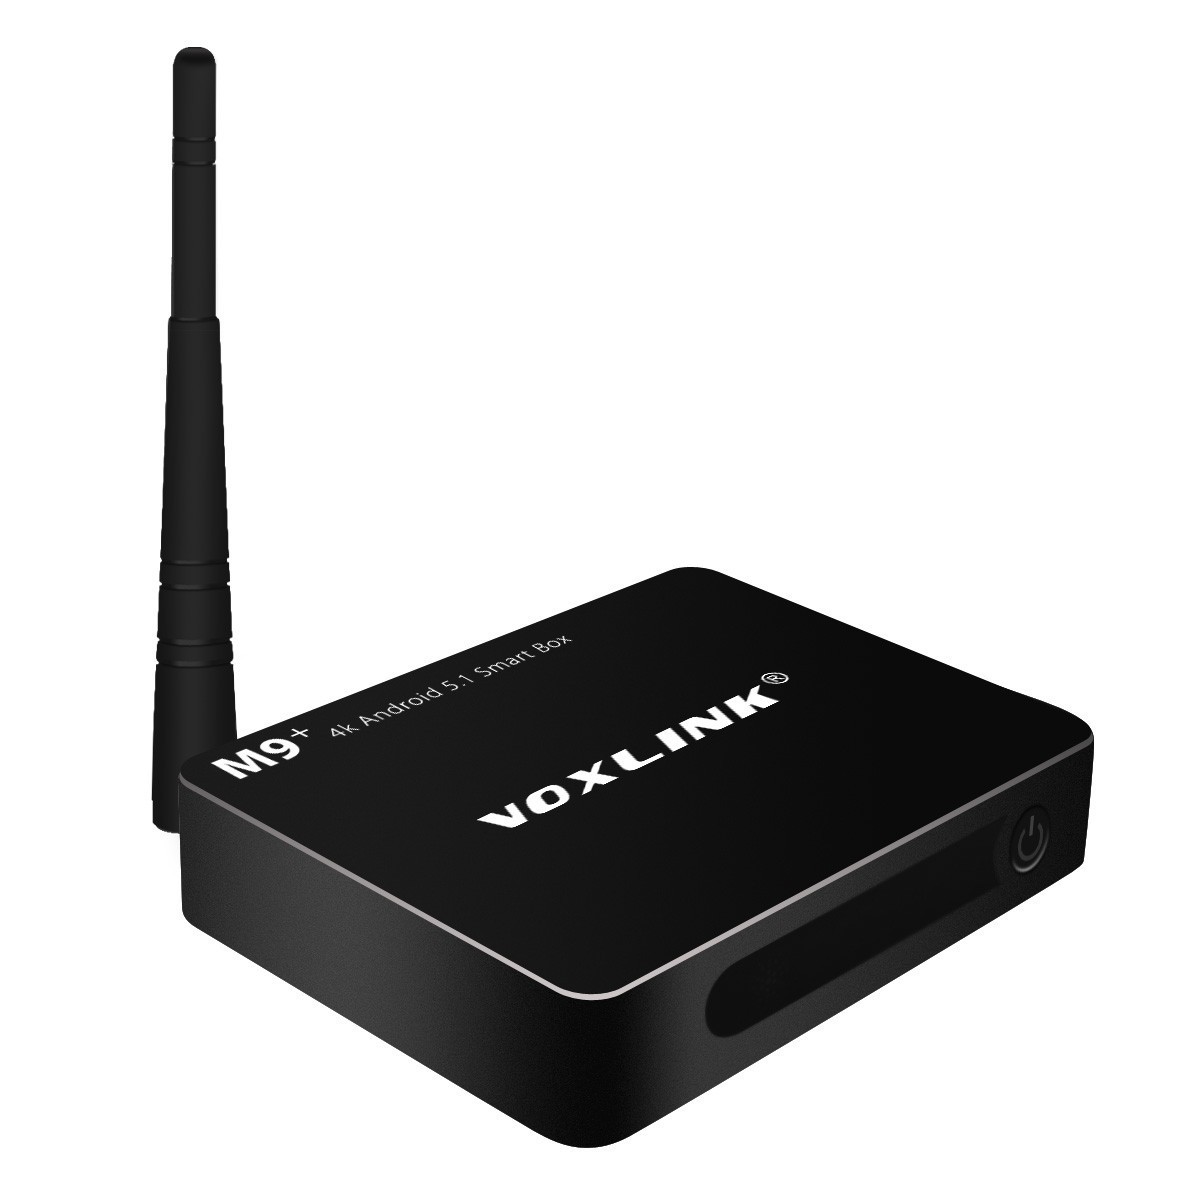 Voxlink M9 Android 5.1.1 1+8G S905 network player network TV set-top box